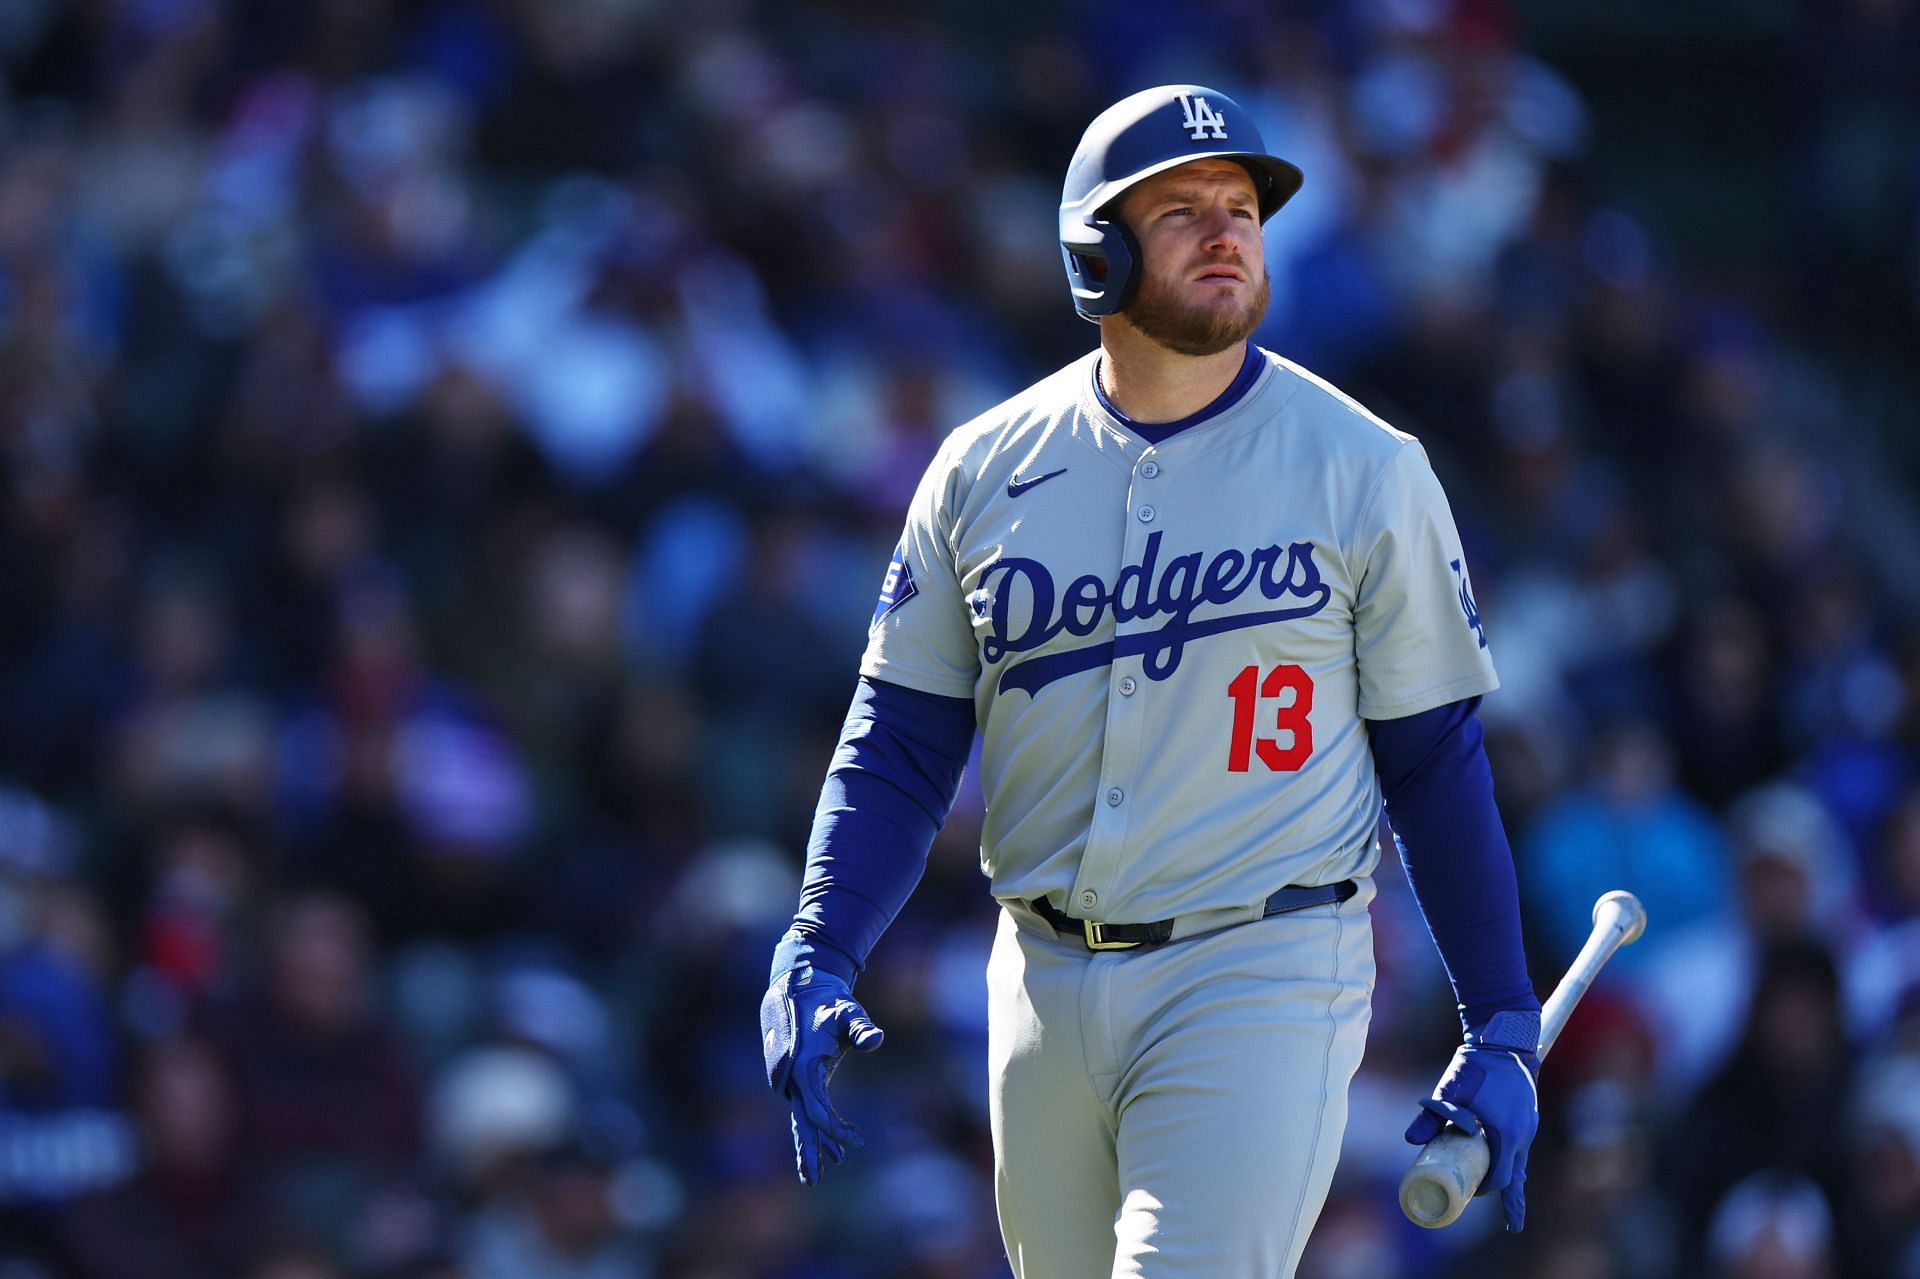 Max Muncy is looking to rebound offensively